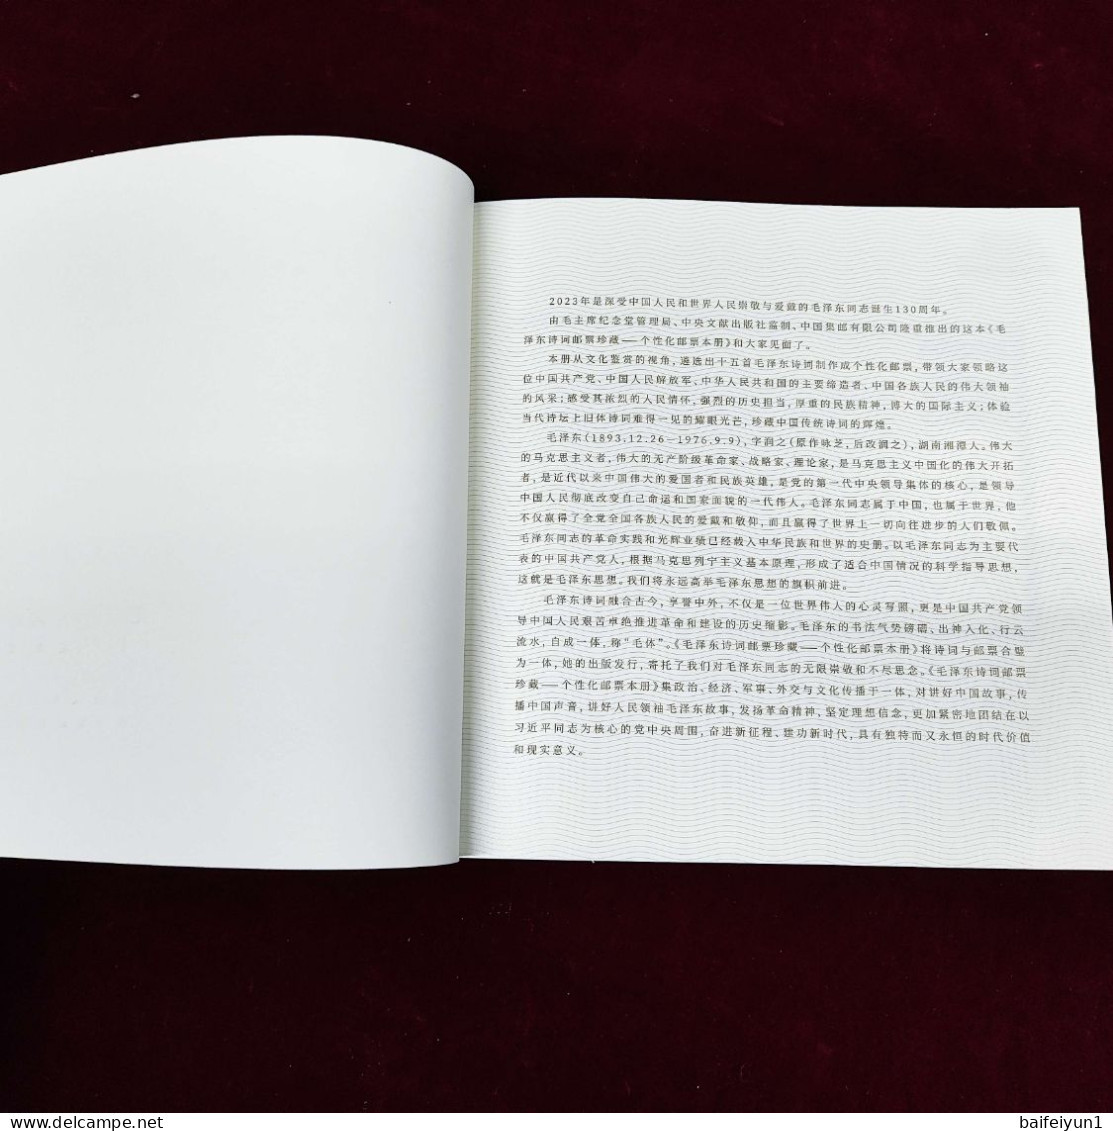 China 2023 GPB-21 The Poetry Of Mao Zedong Special  Booklet - Ungebraucht